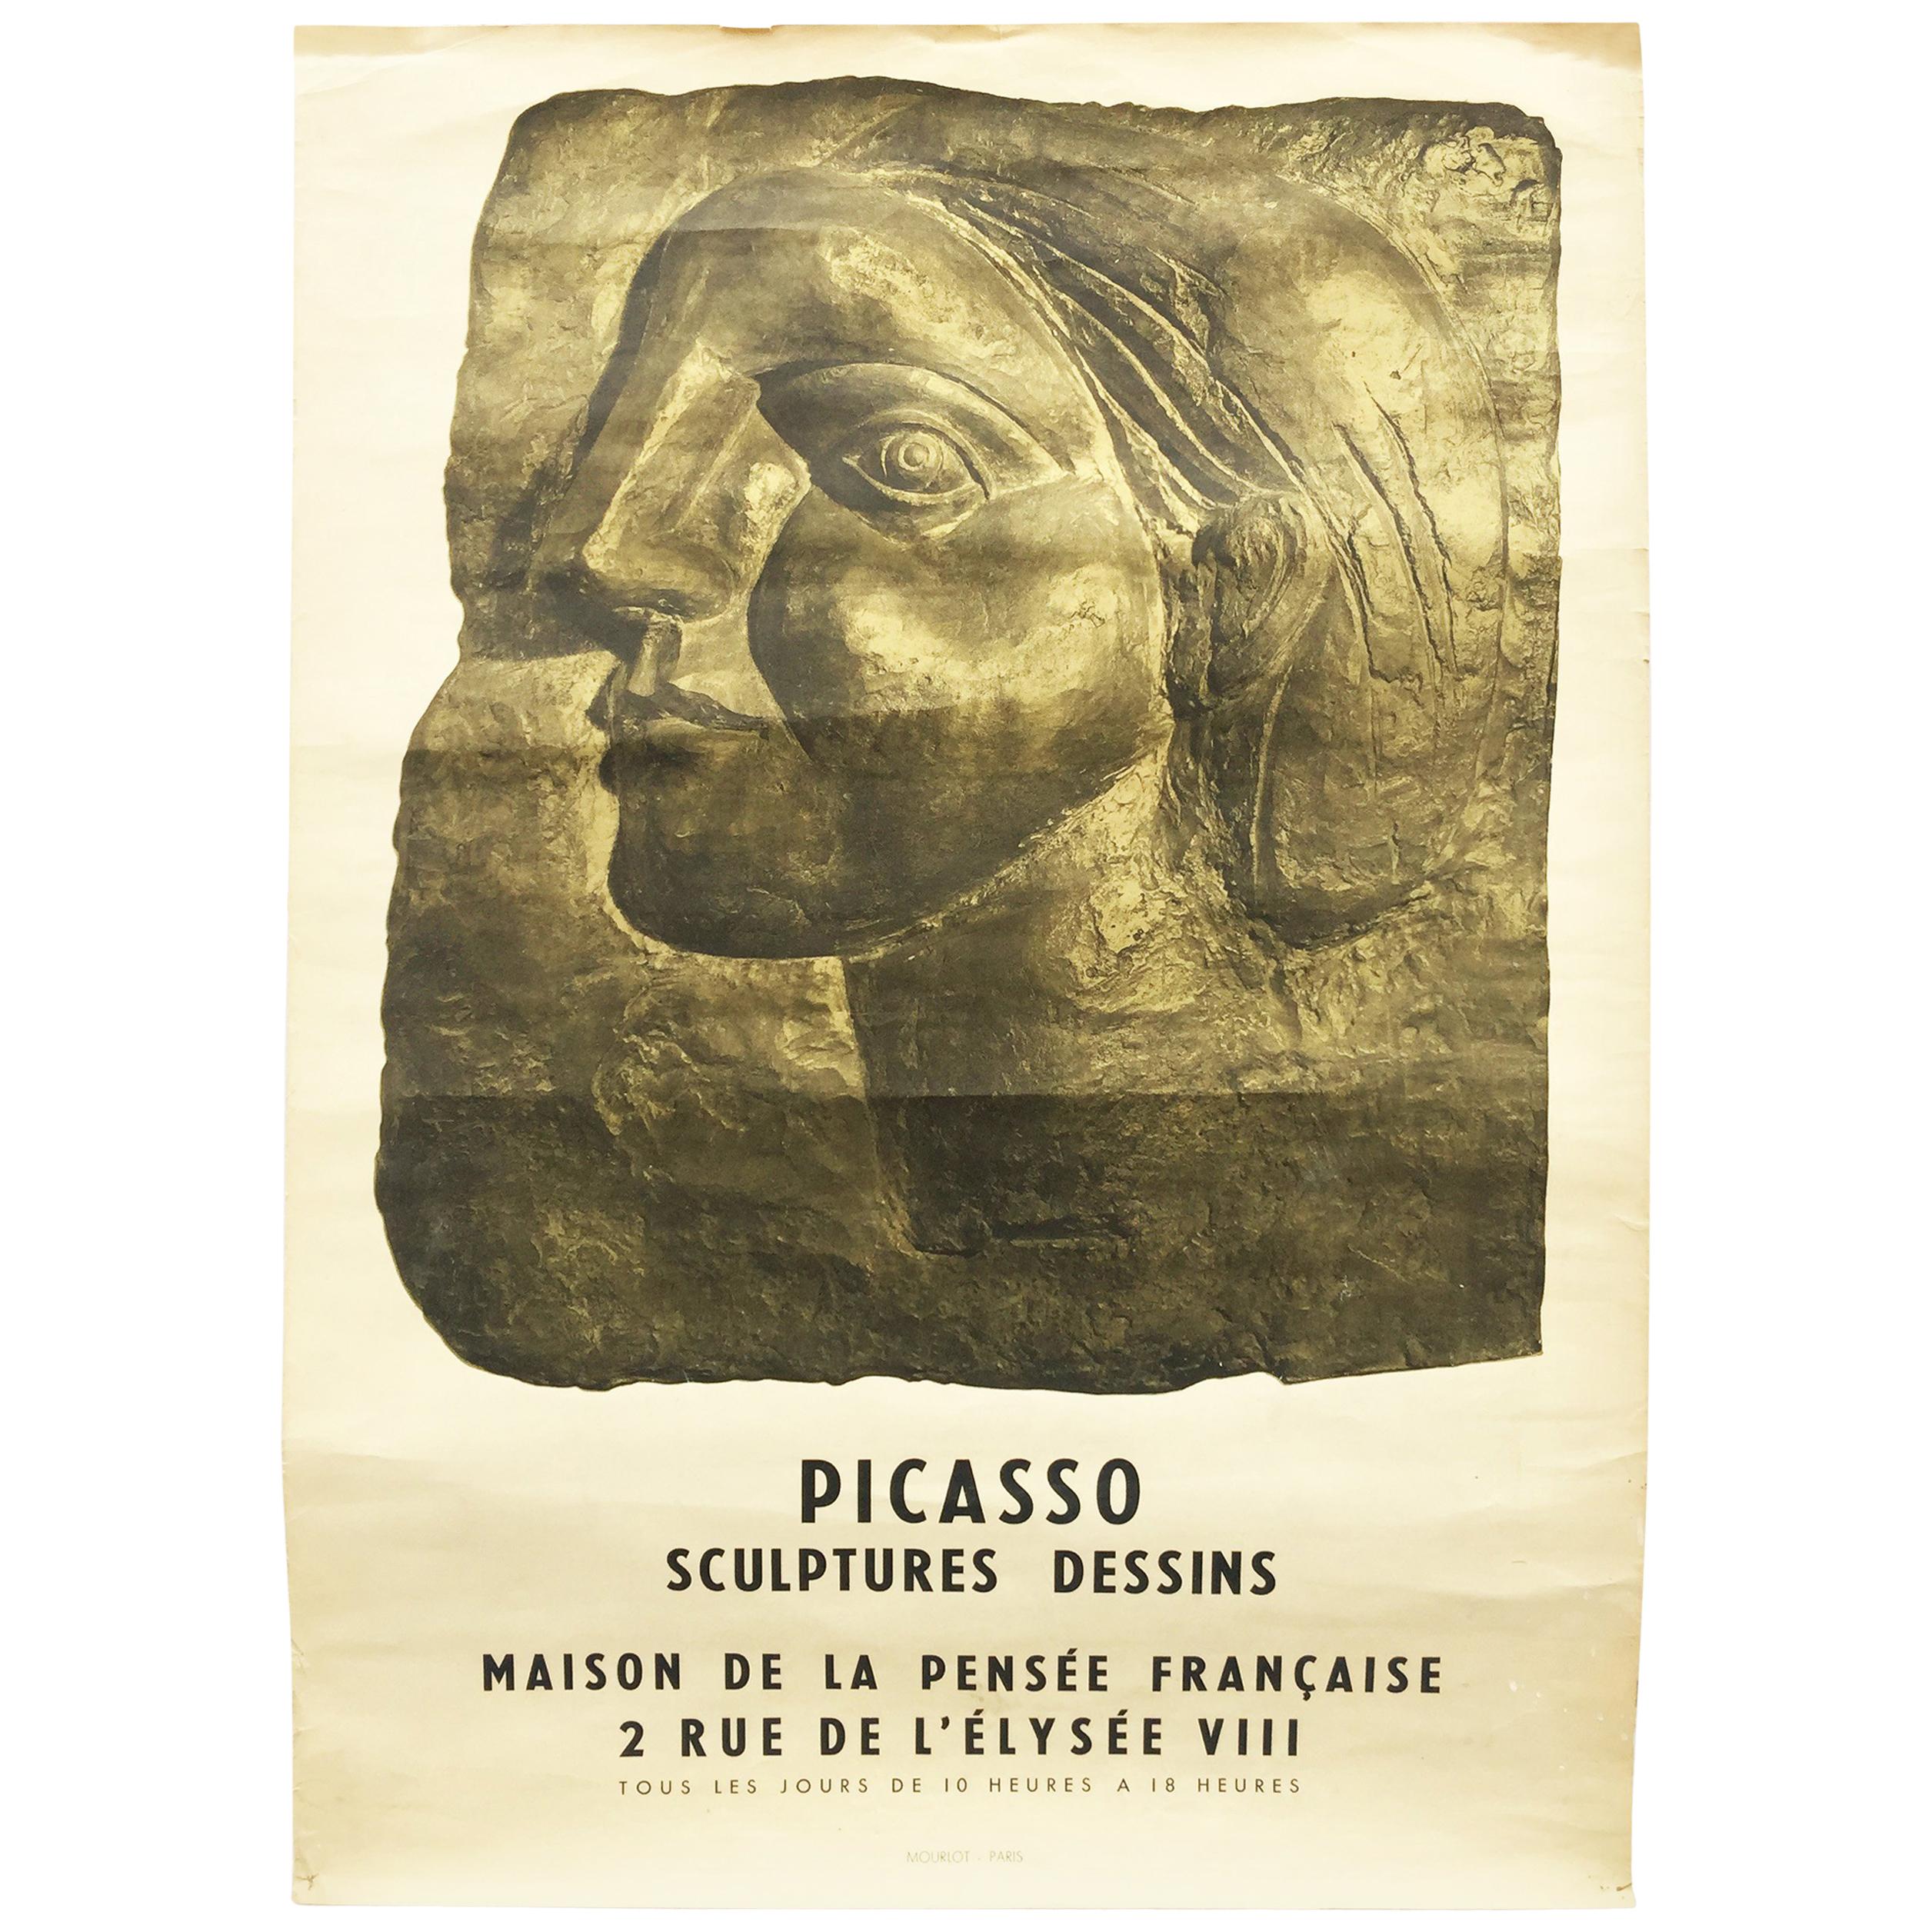 Vintage Pablo Picasso Poster Created for the 1958 Exhibition